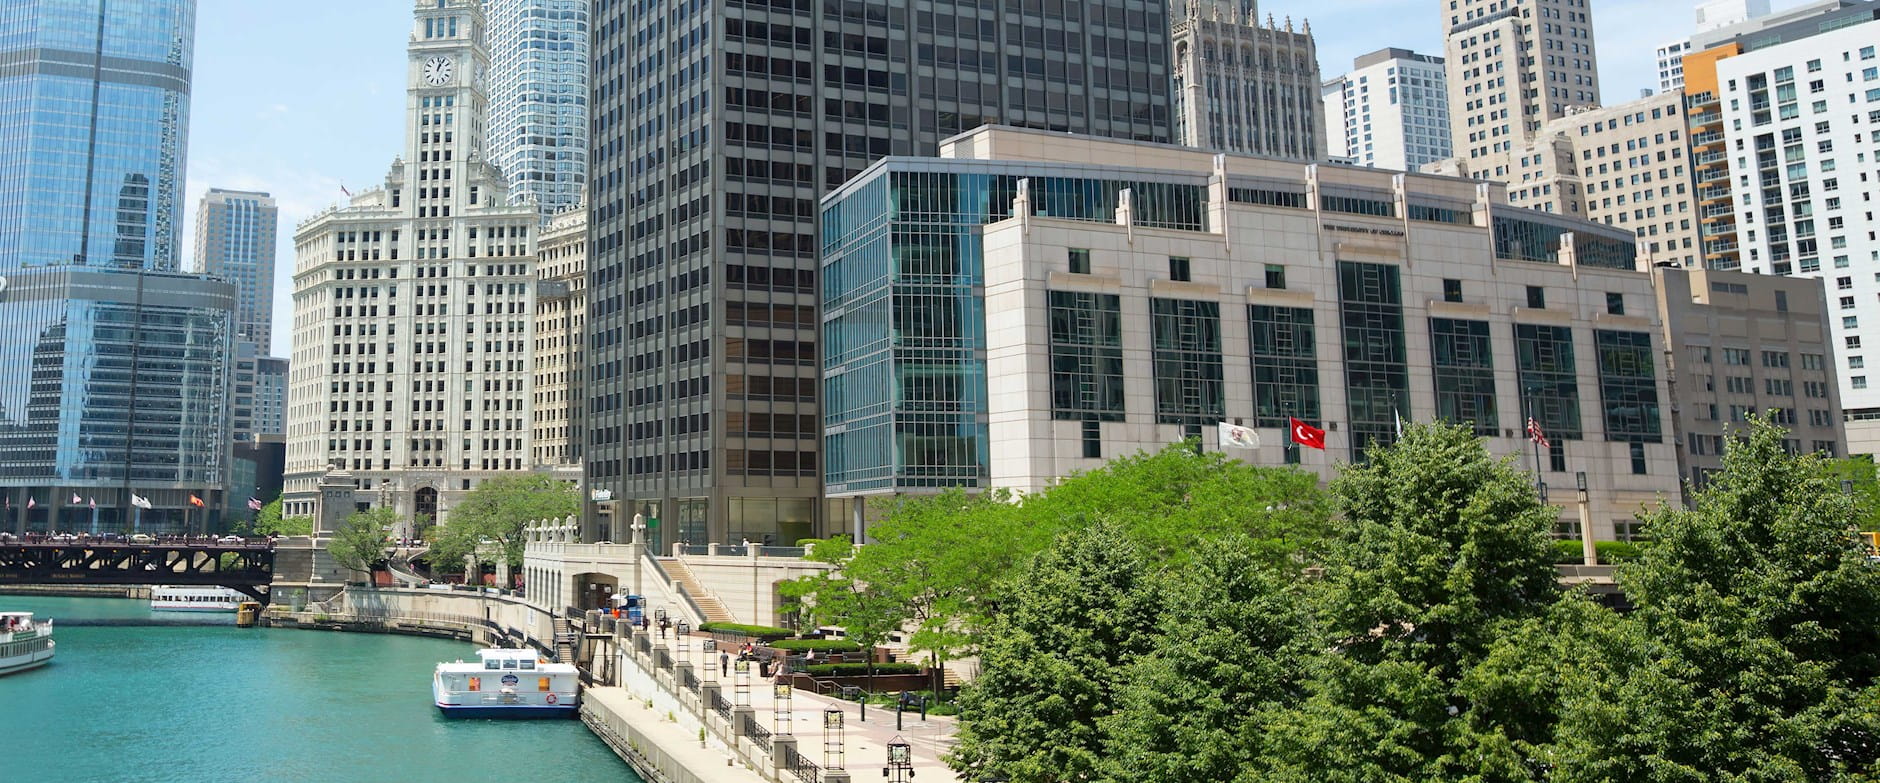 The Gleacher Center with the Chicago River to the side on a sunny day